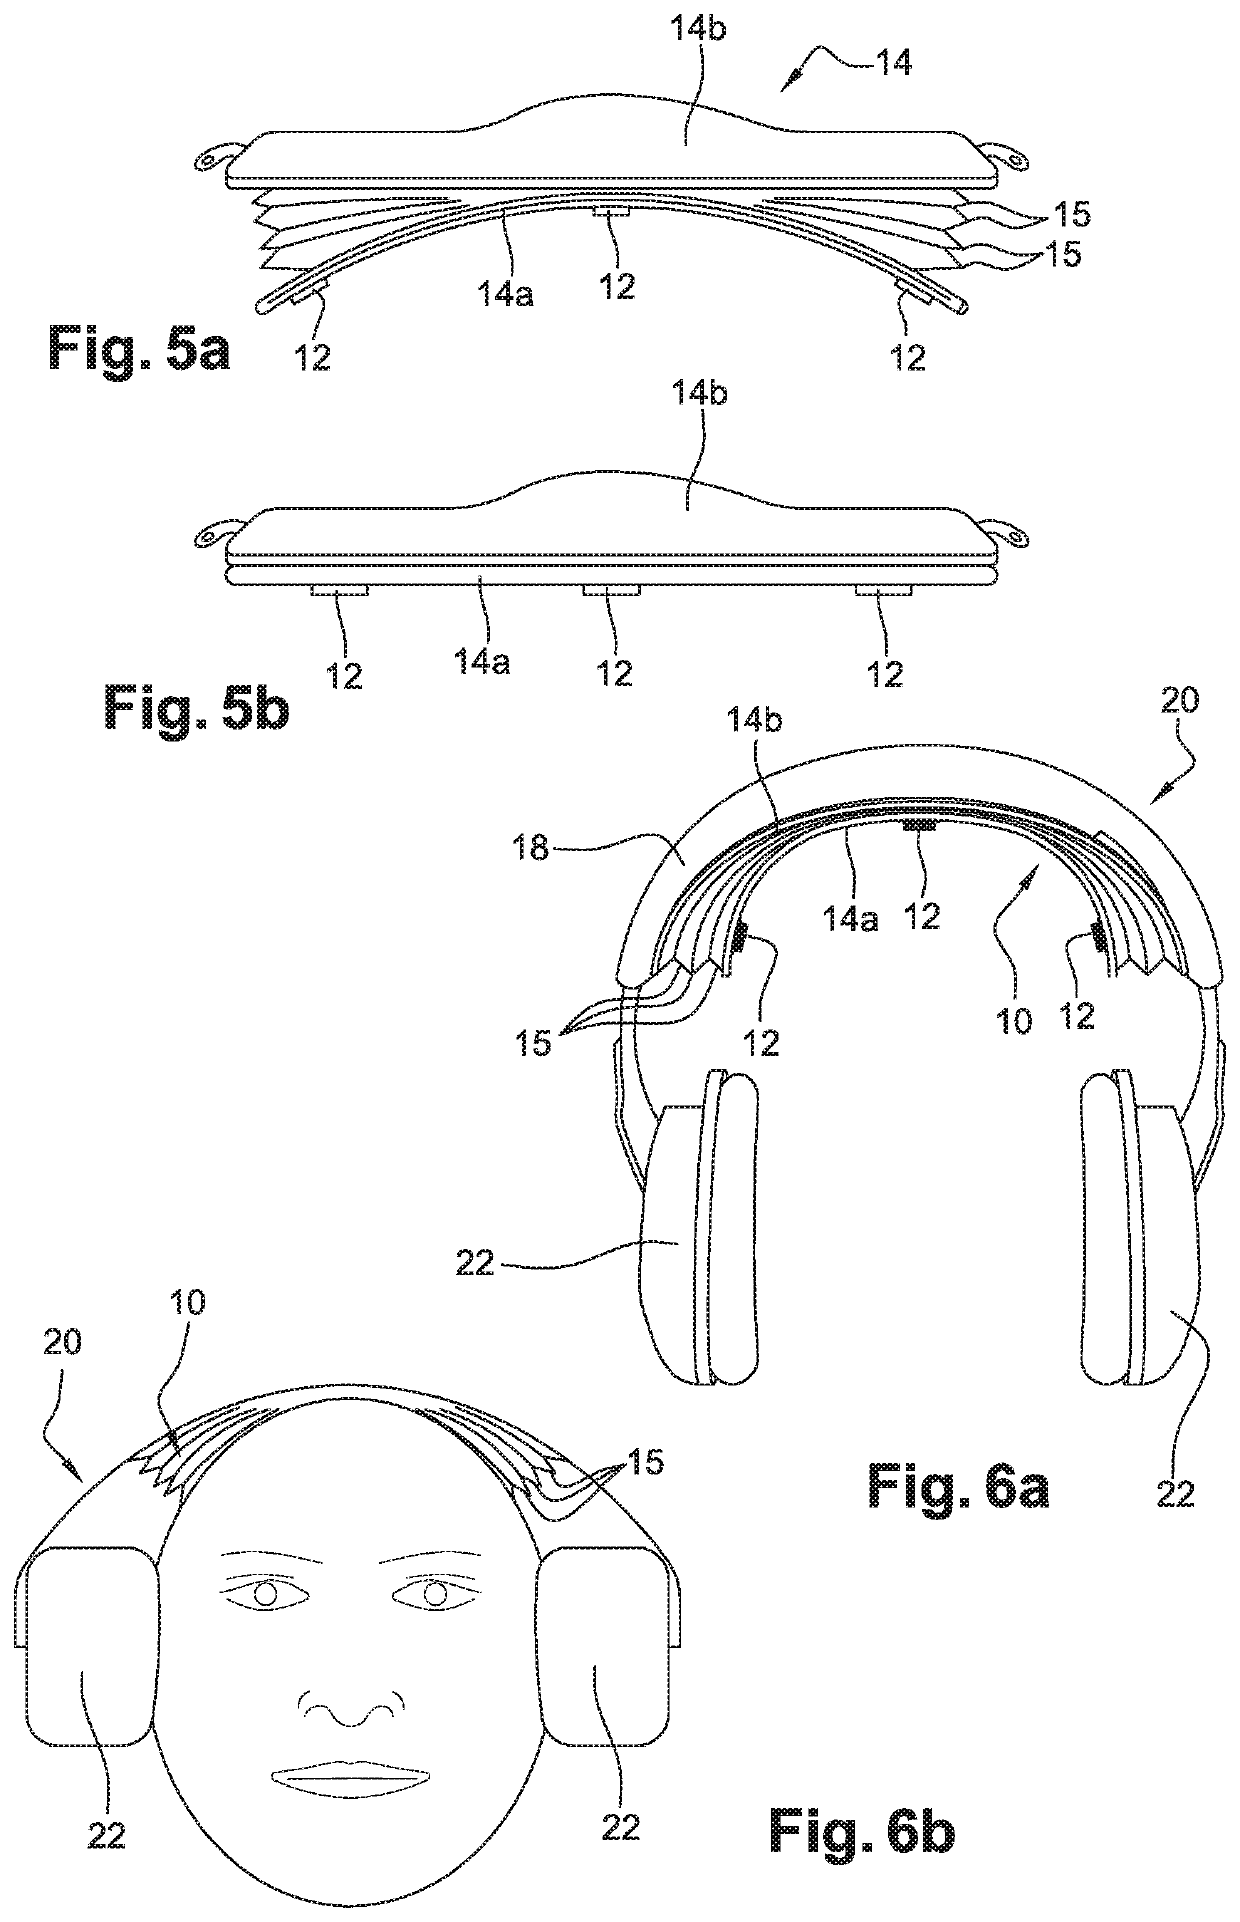 Device for measuring and/or stimulating brain activity